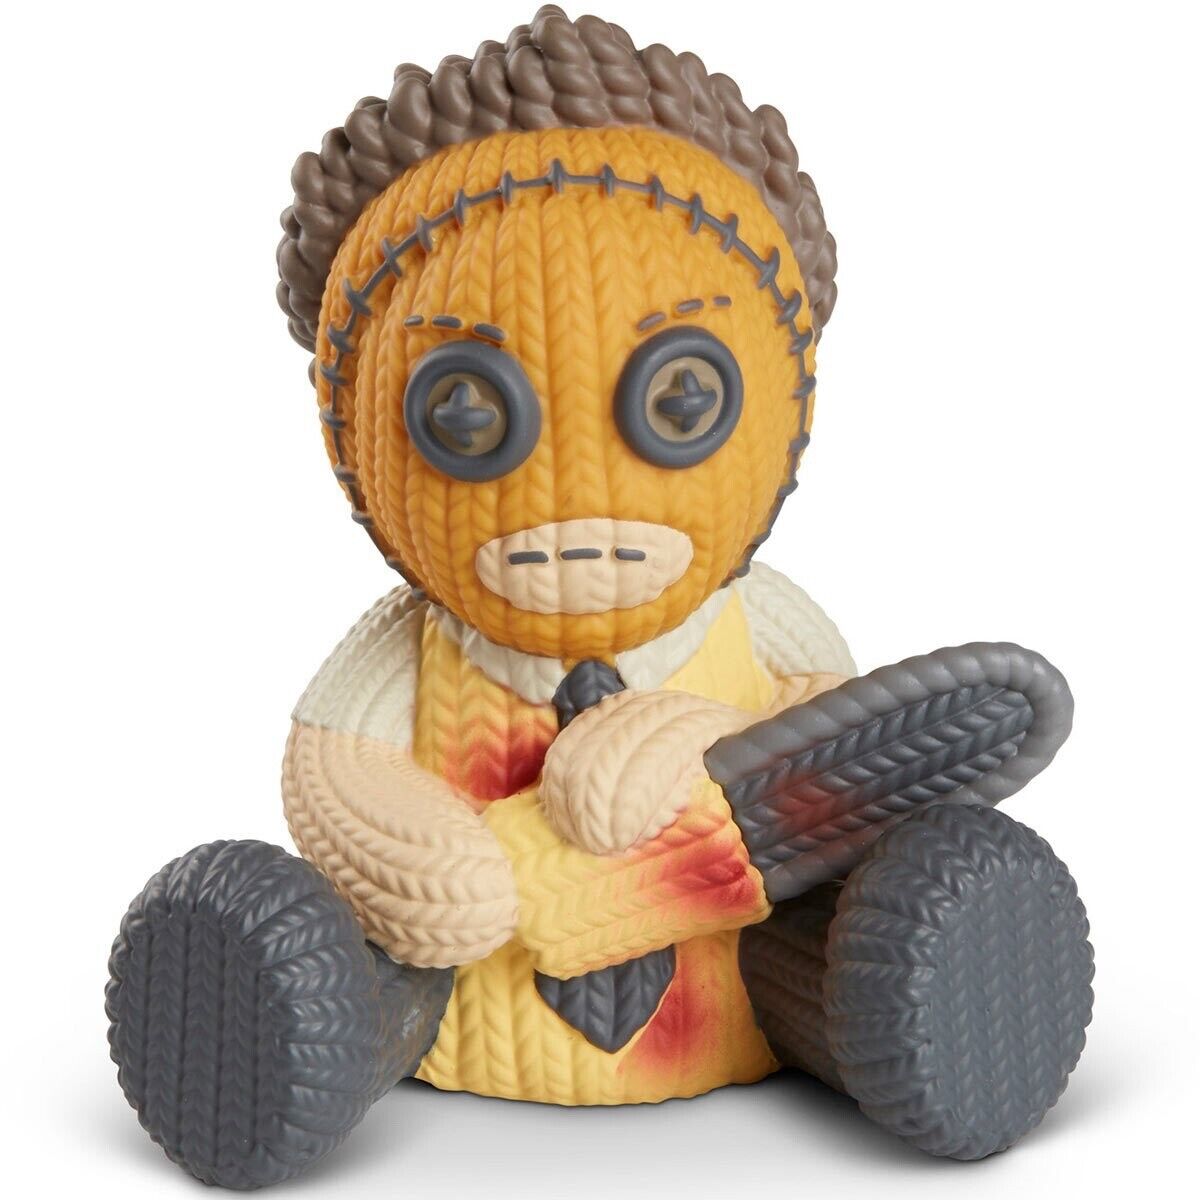 HMBR • LEATHERFACE Vinyl Figure • TEXAS CHAINSAW MASS Knit Series #7• Ships Free